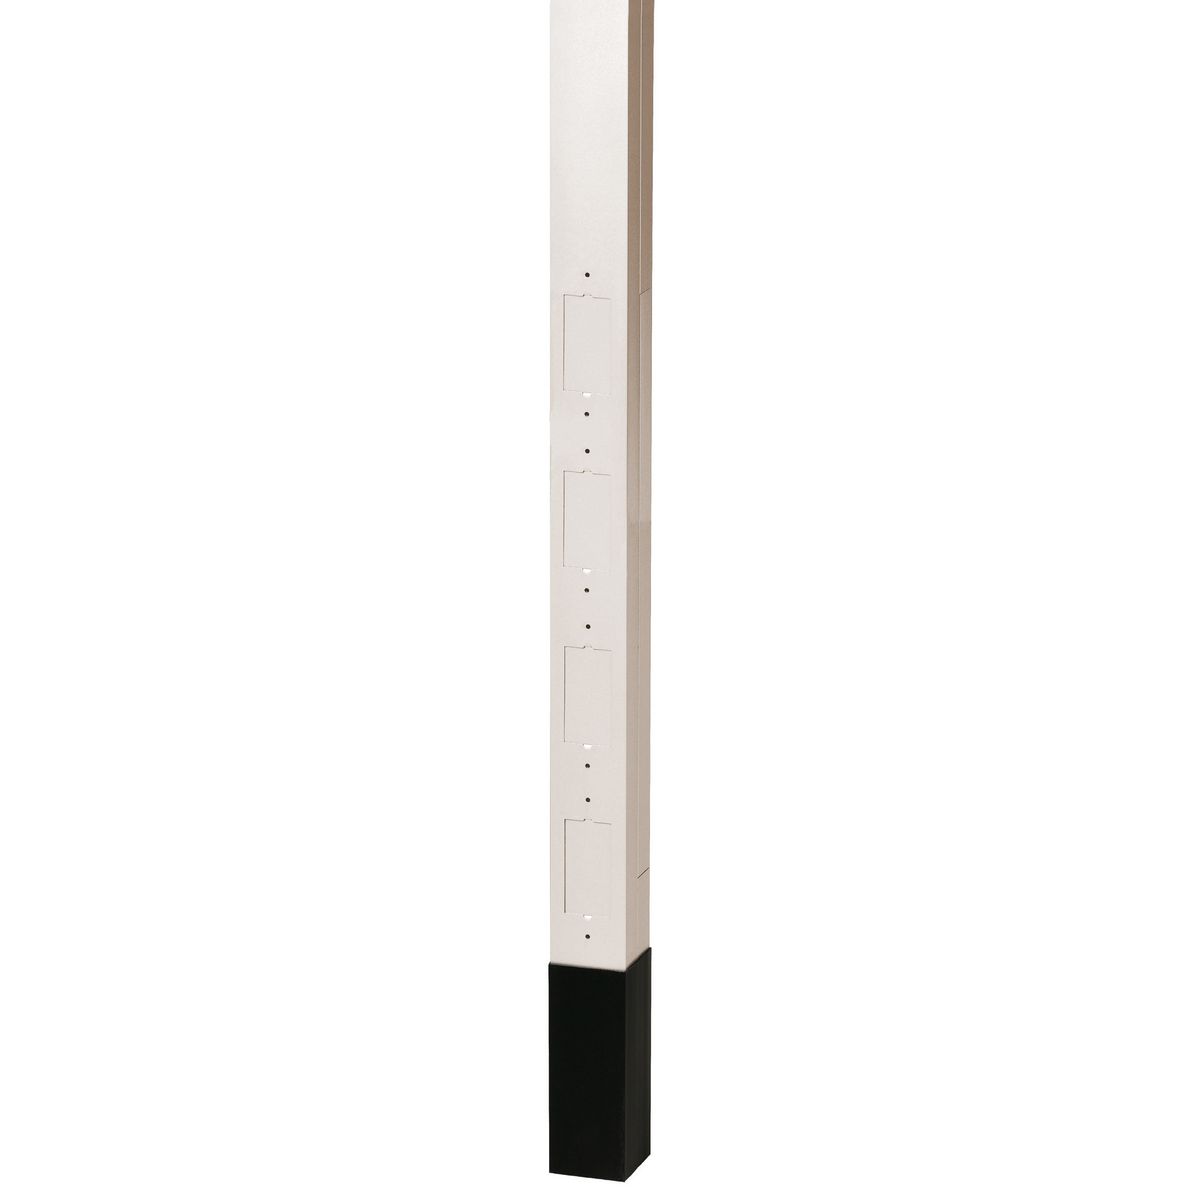 SVCE POLE, 12'2", BLANK /DIVIDER, OW